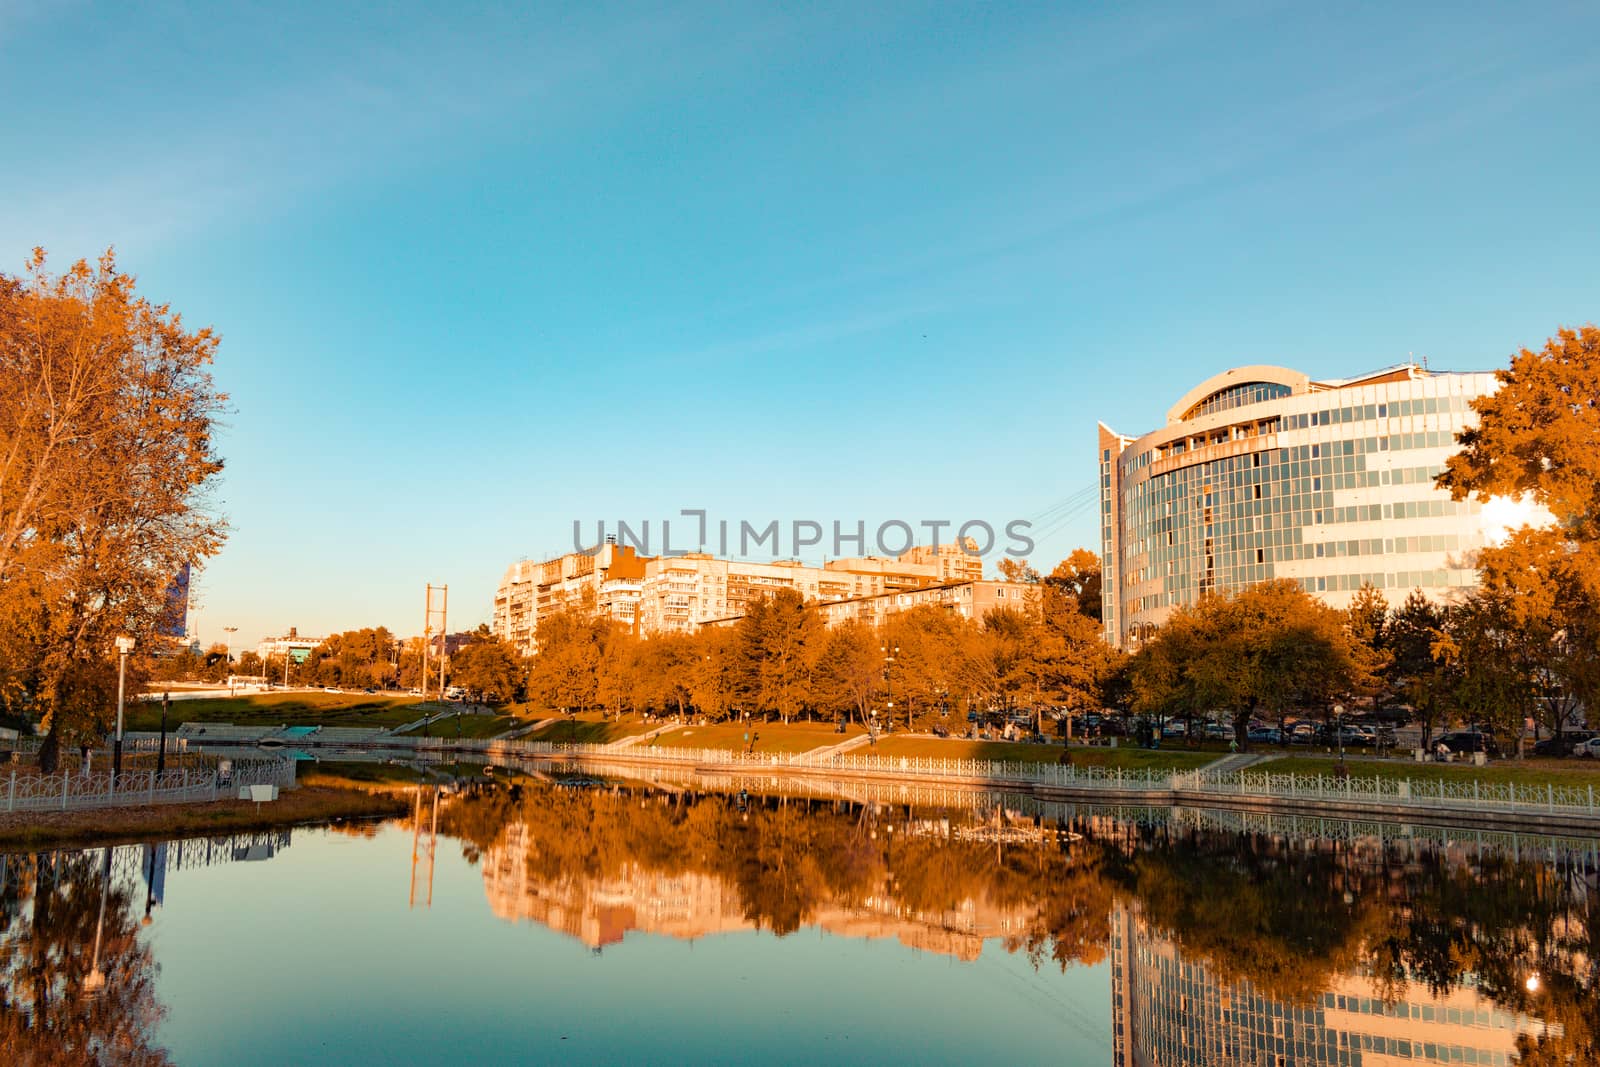 City ponds in the autumn. Trees covered with yellow and orange leaves are reflected in the water. Blue sky.